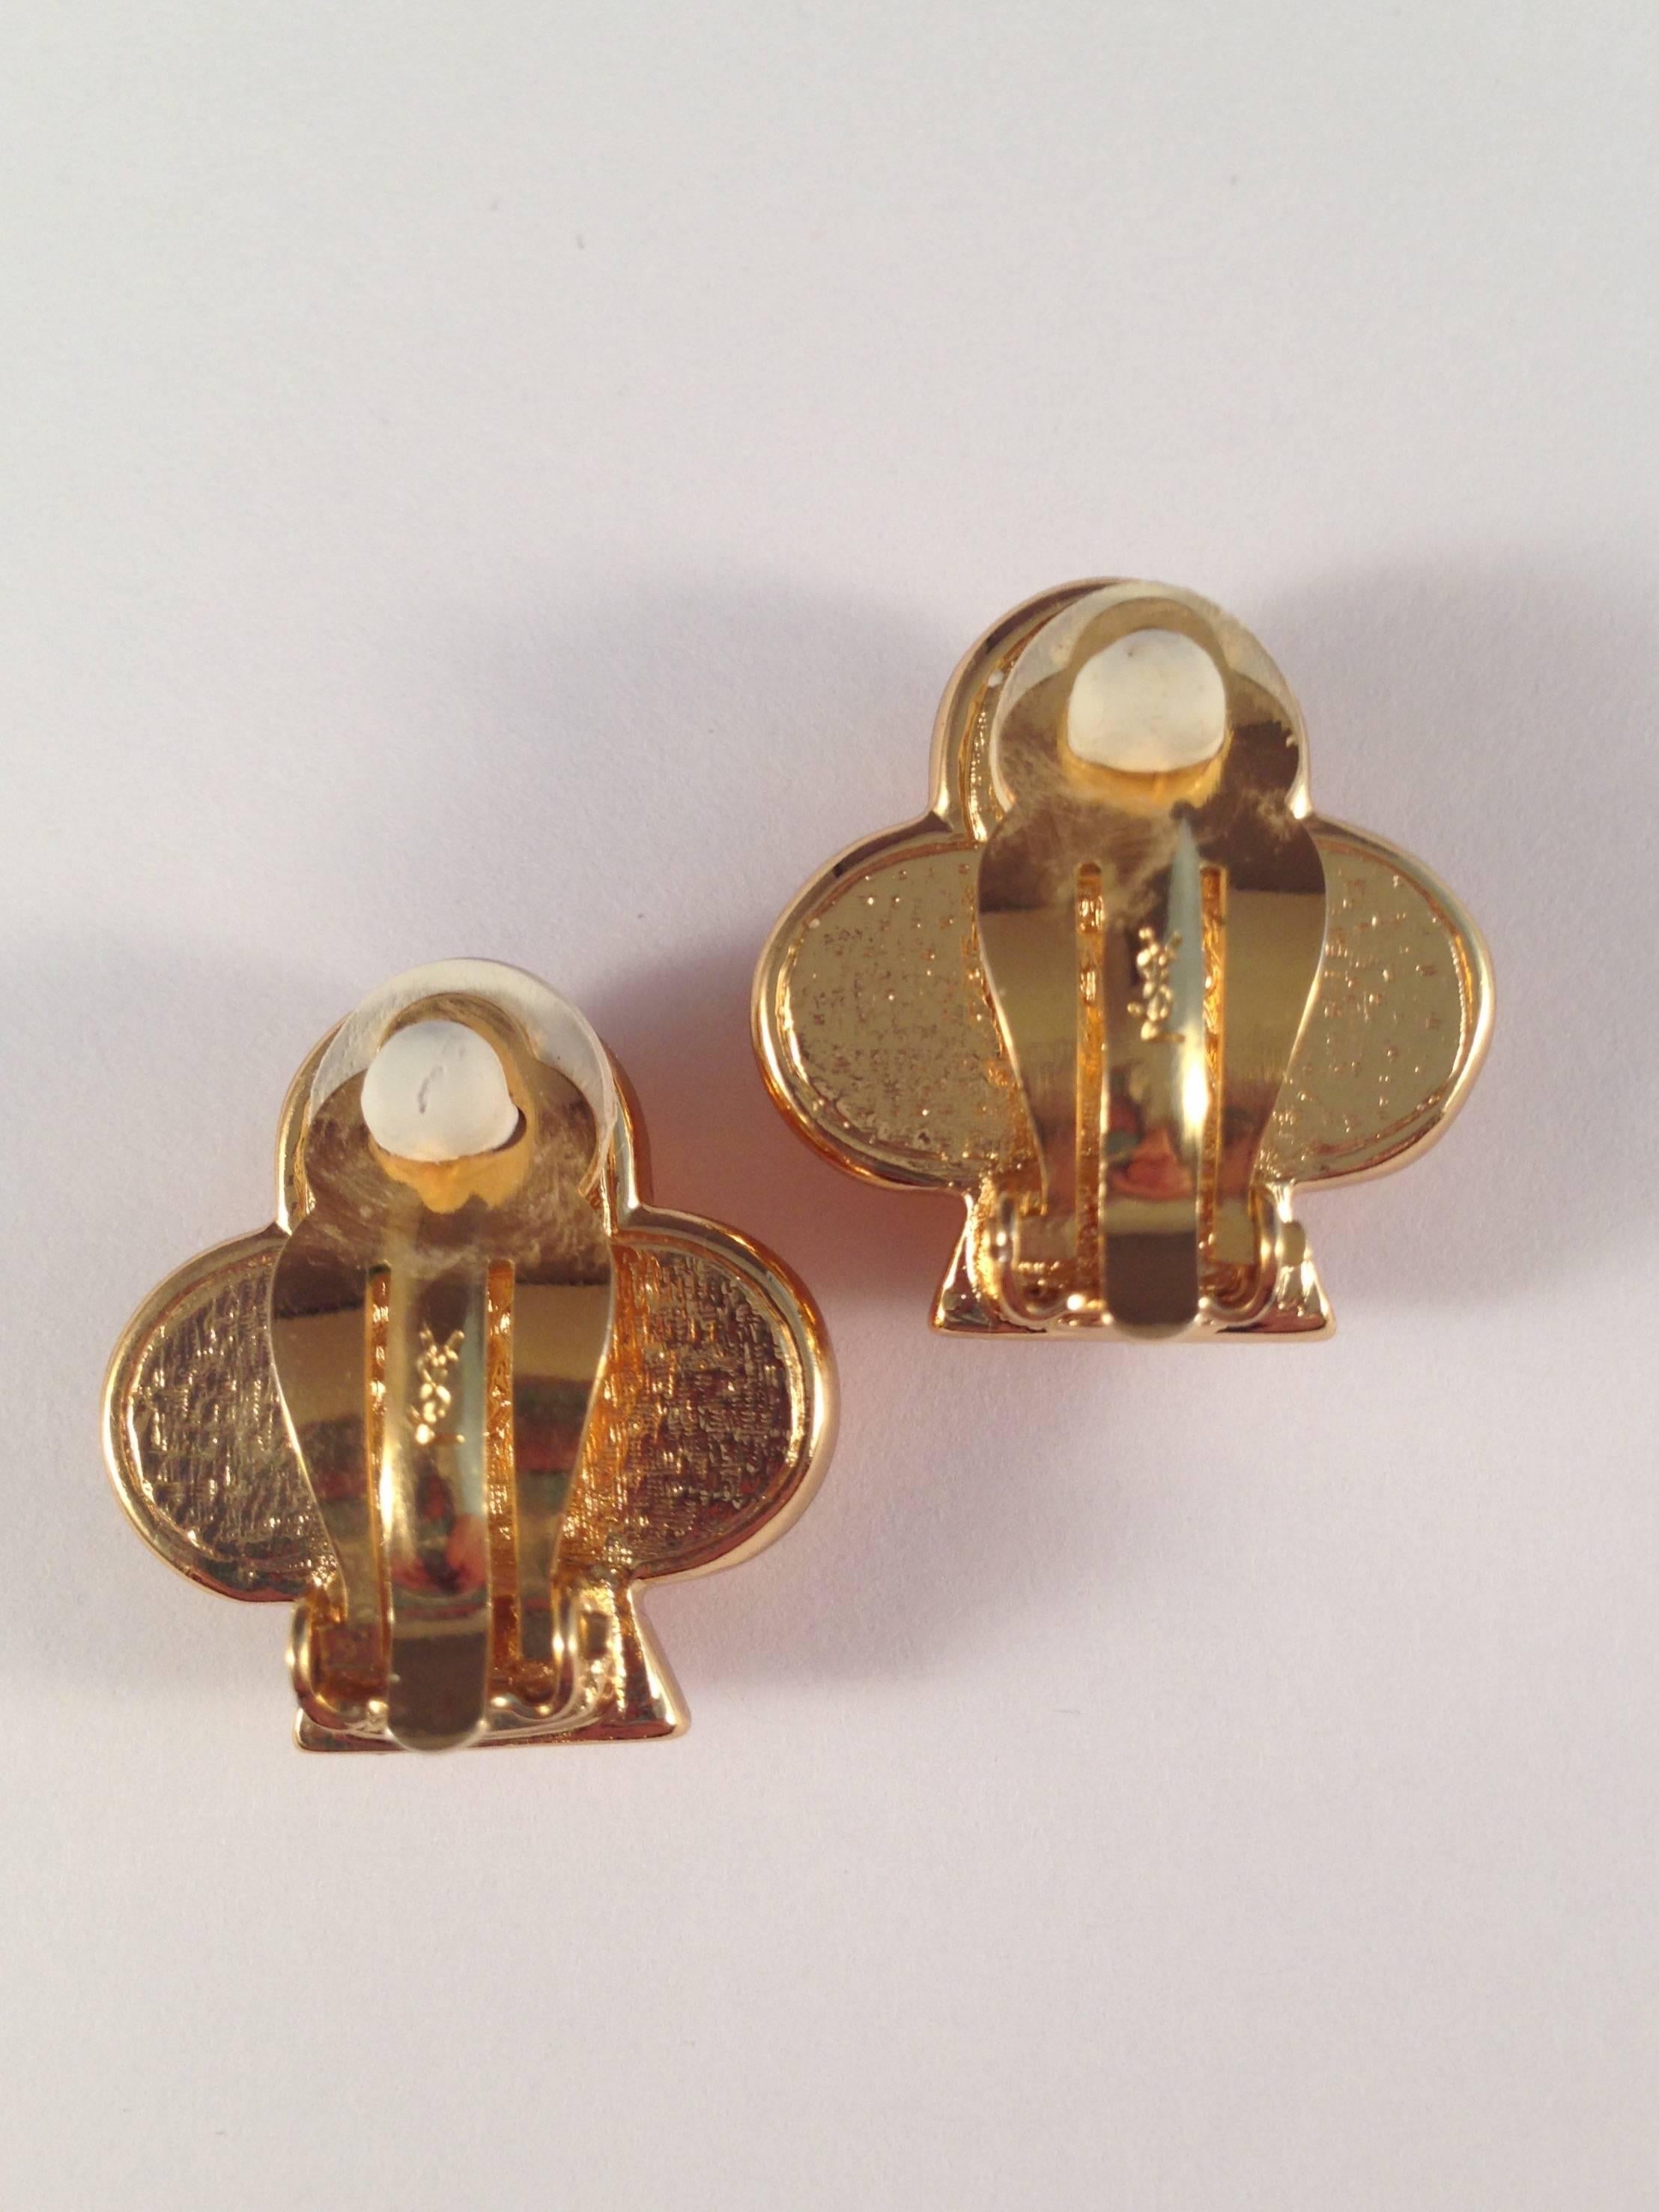 These Yves Saint Laurent clip-on earrings are from the 1980s and measure  7/8